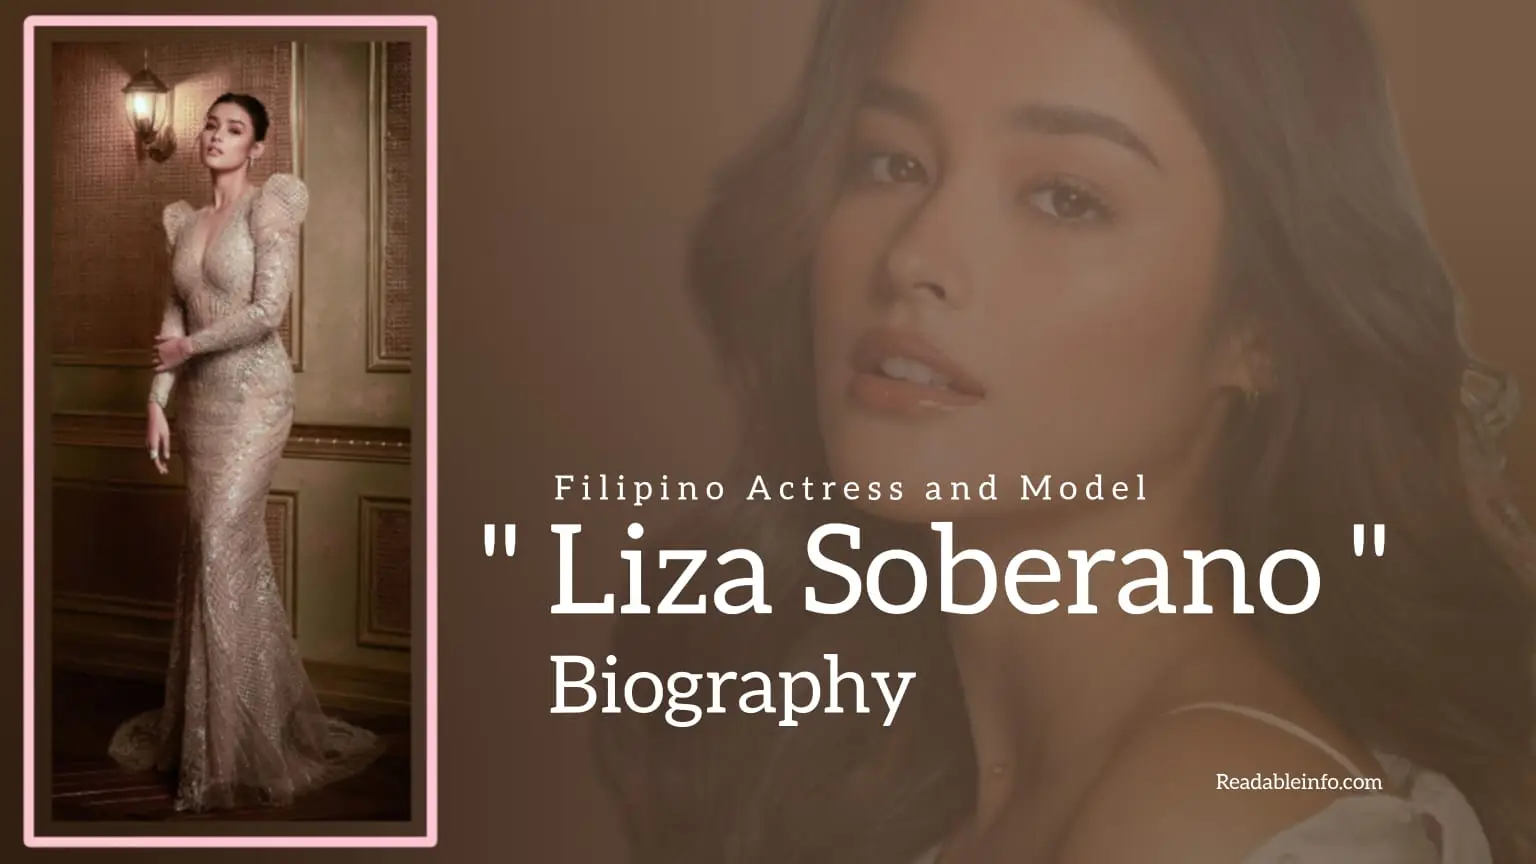 You are currently viewing Liza Soberano Biography (Filipino Actress And Model)